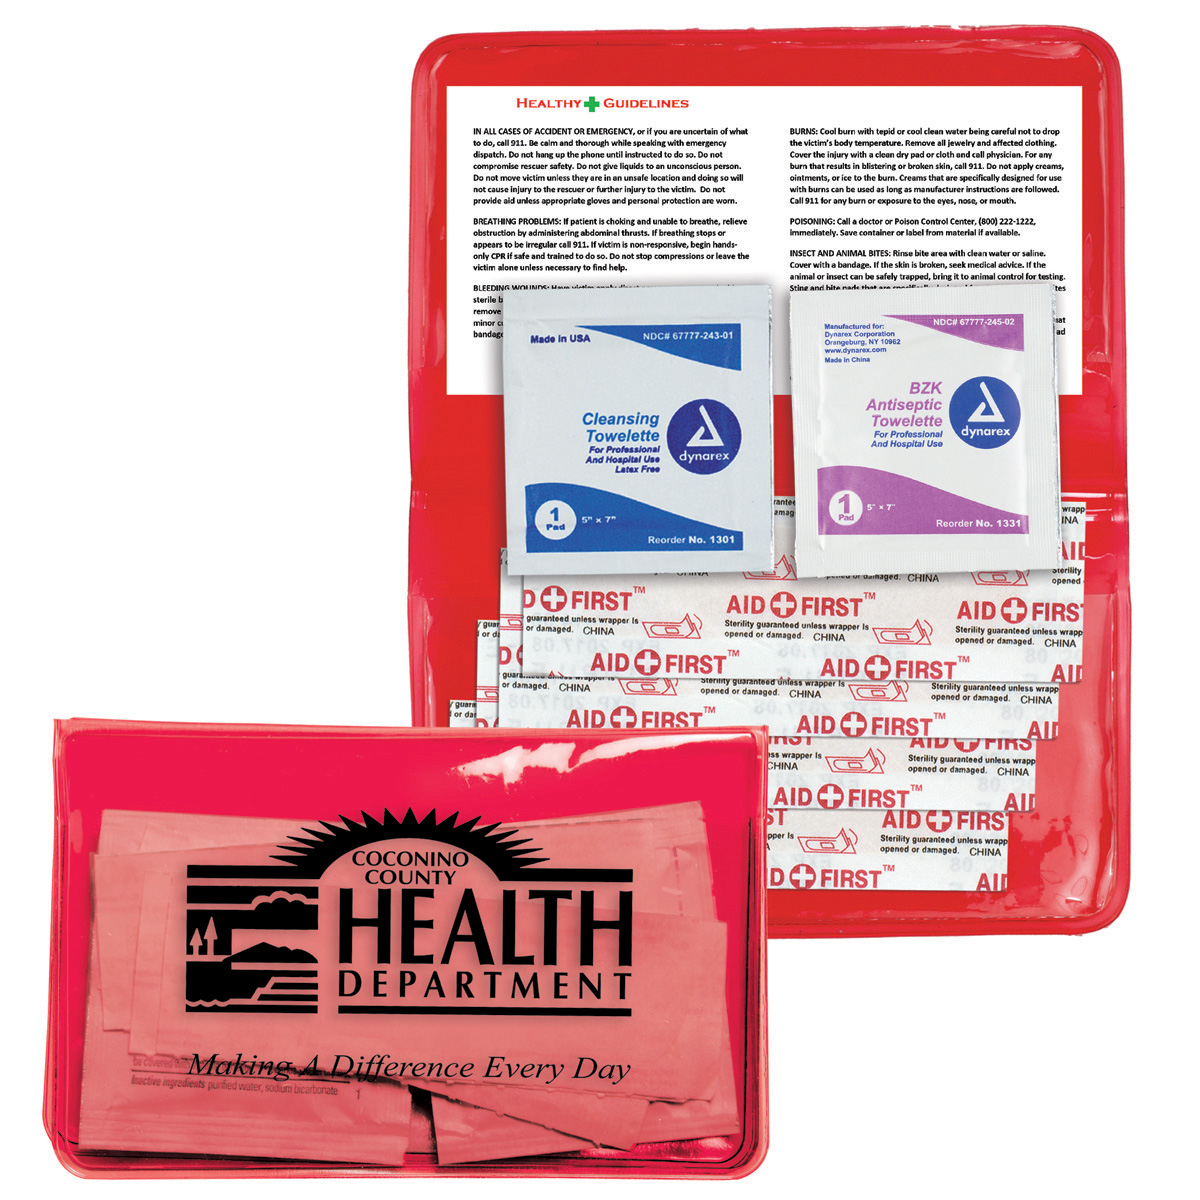 "HEAL-ON-THE-GO" 7 Piece Economy Healthy Living Pack in Colorful Vinyl Kit